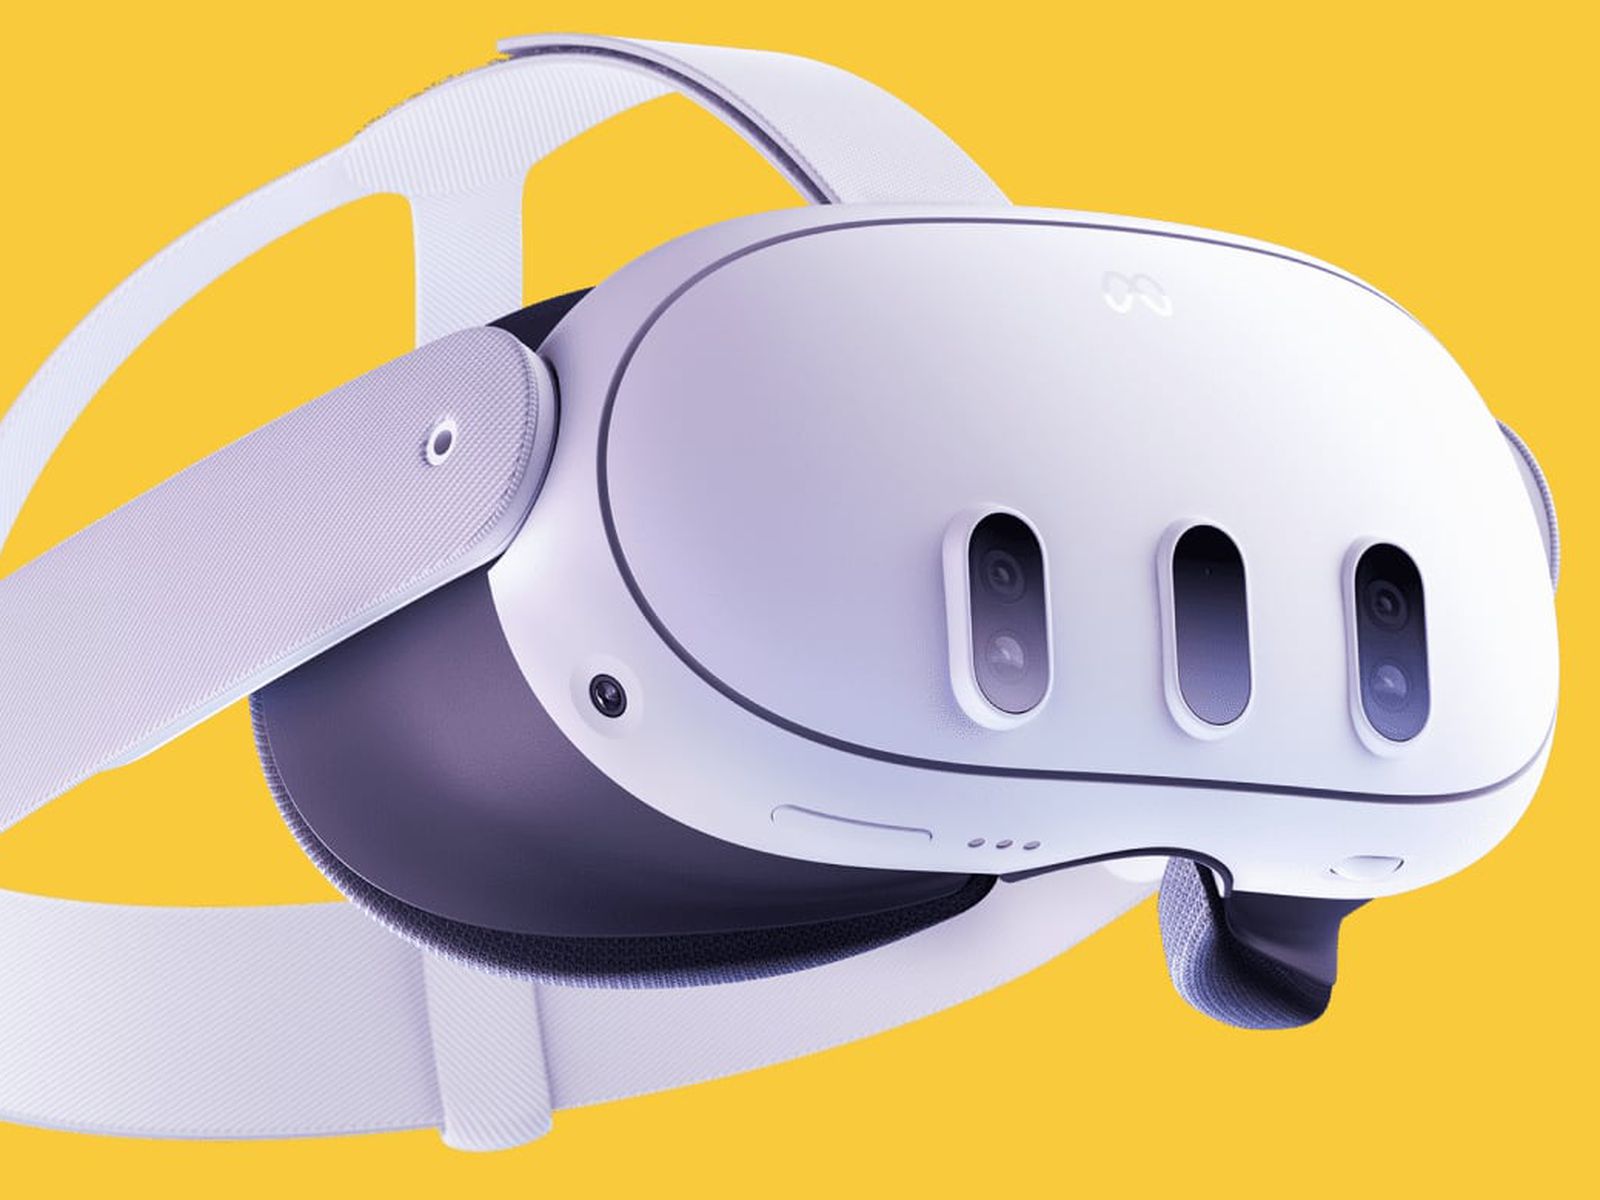 Meta Quest 3, next-gen Mixed Reality headset launched, ahead of expected  debut of the Apple Reality Pro headset at WWDC